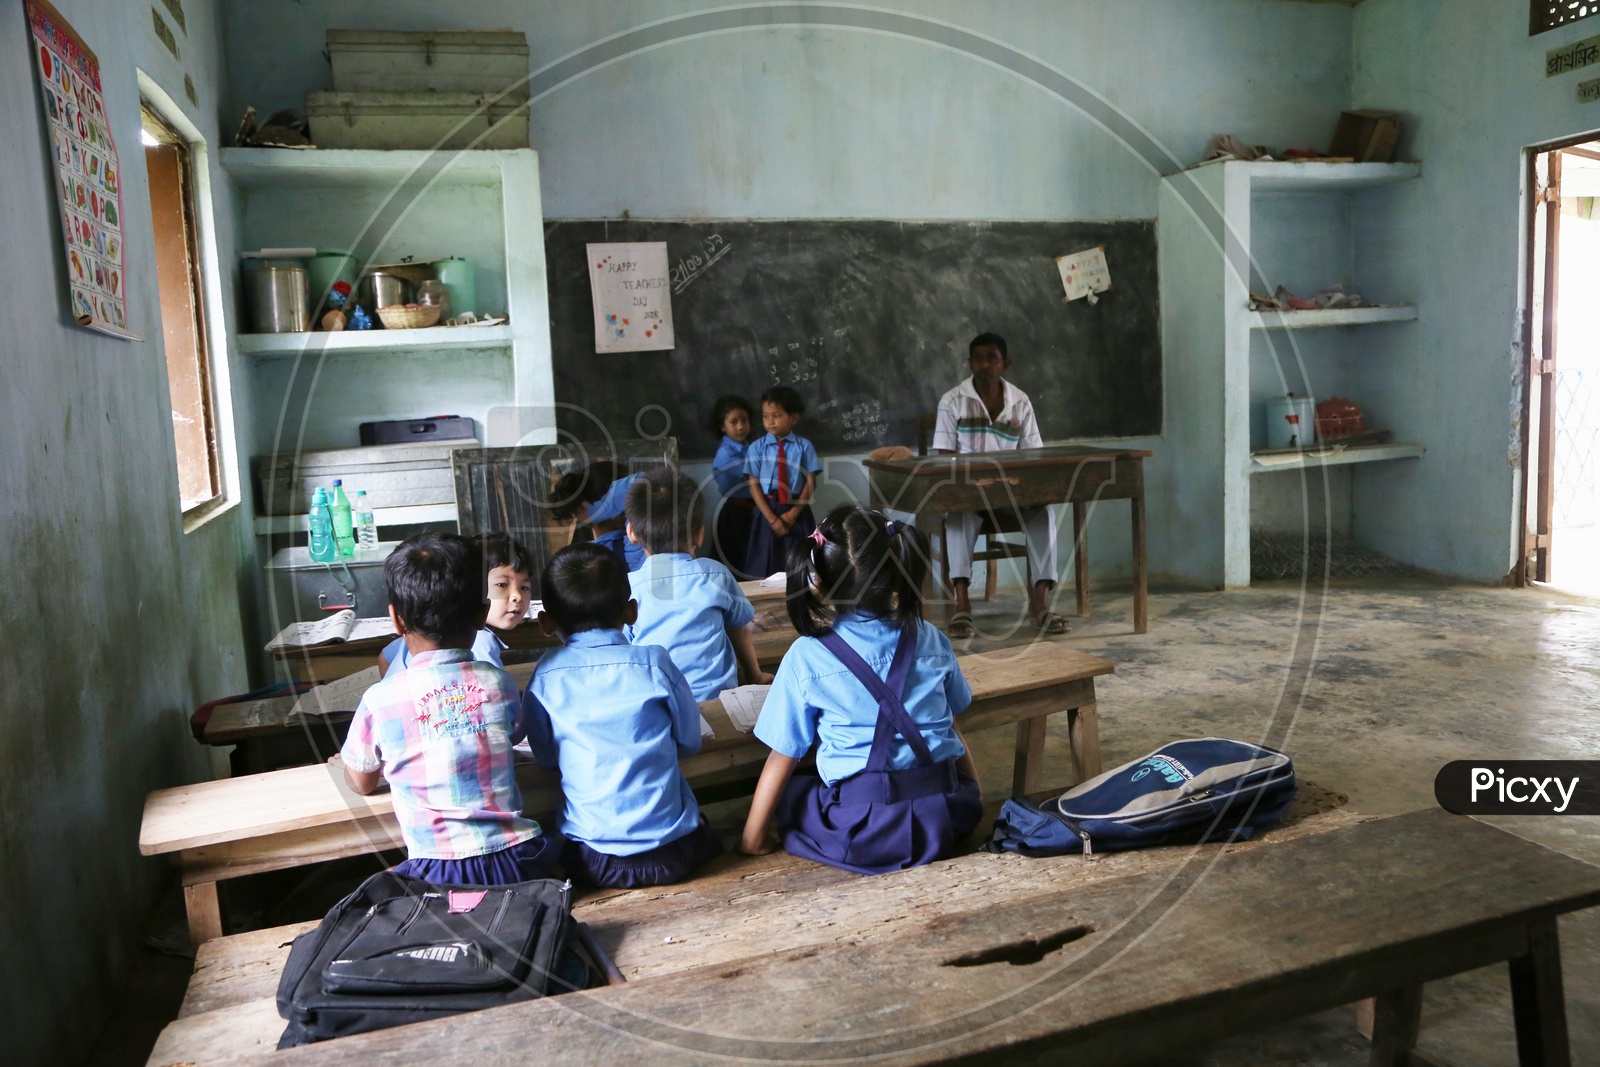 School Students Or School Children Wearing Uniforms  In a Classroom With Books